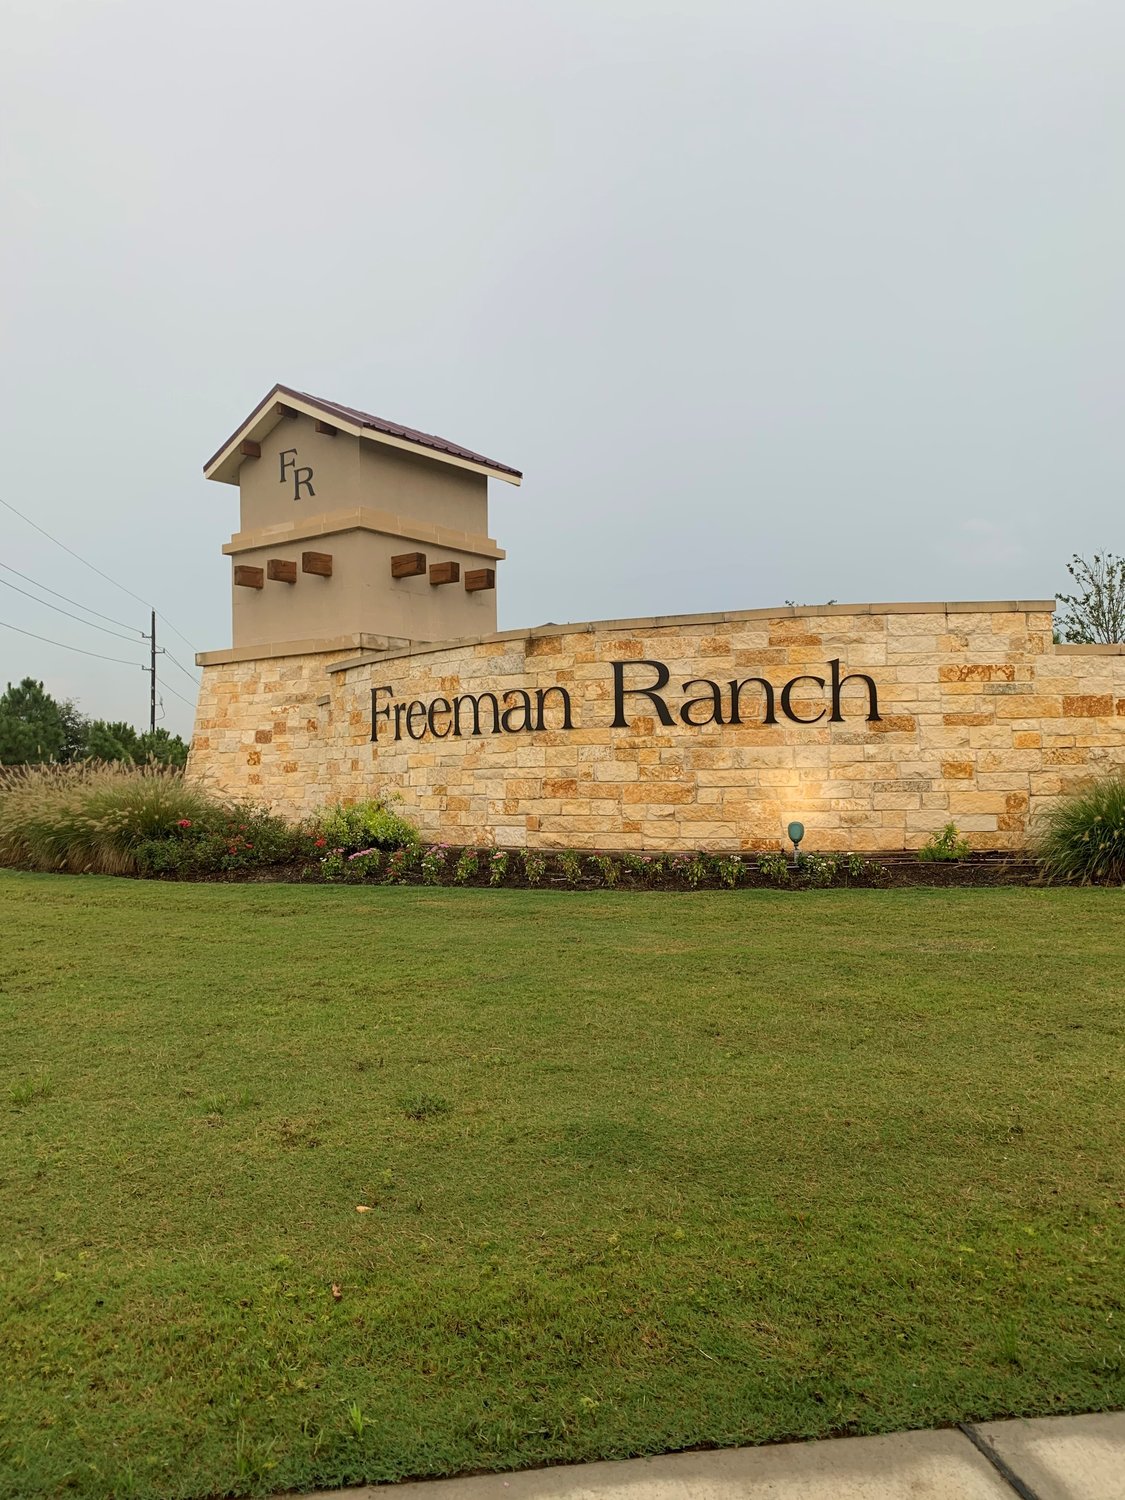 Royal ISD is set to double in size in a few years after multiple subdivisions finish building and people start moving into the new communities such as Freeman Ranch in the Brookshire-Pattison Area. With 812 lots, the Freeman Ranch subdivision has 375 homes left to build.